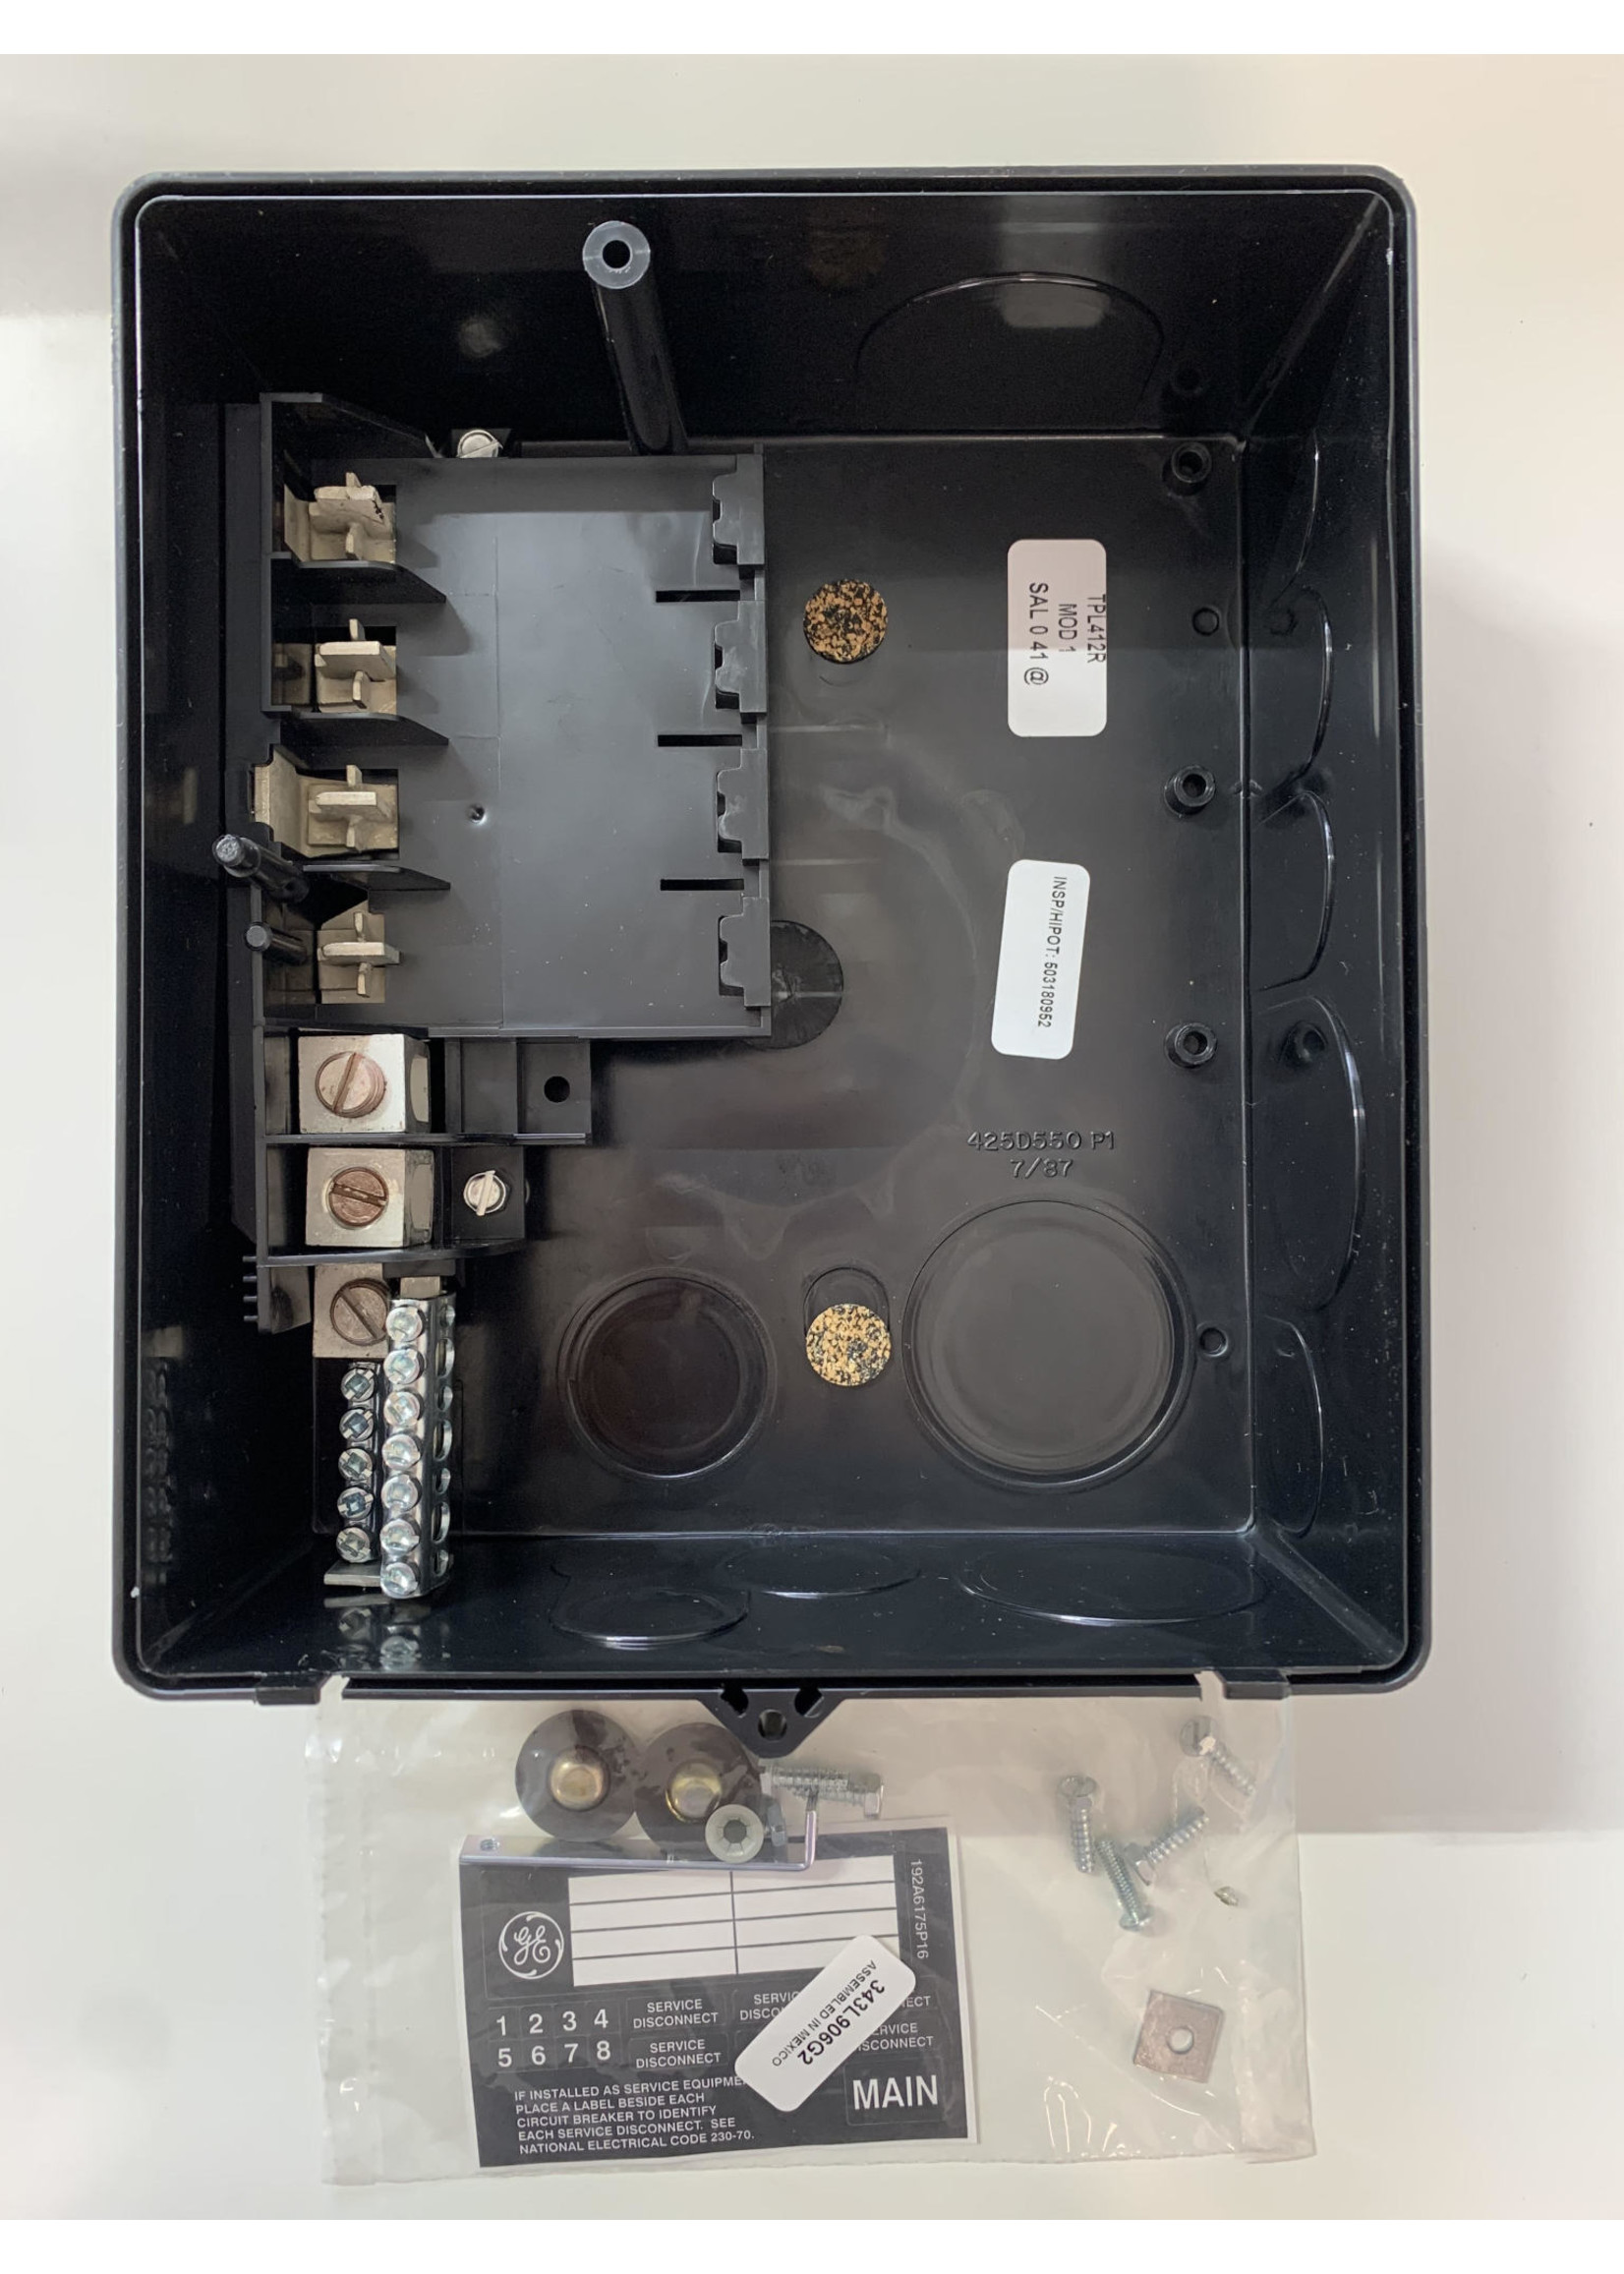 GE PANEL 104 125 AMPS IMPERMEABLE (TPL412R)